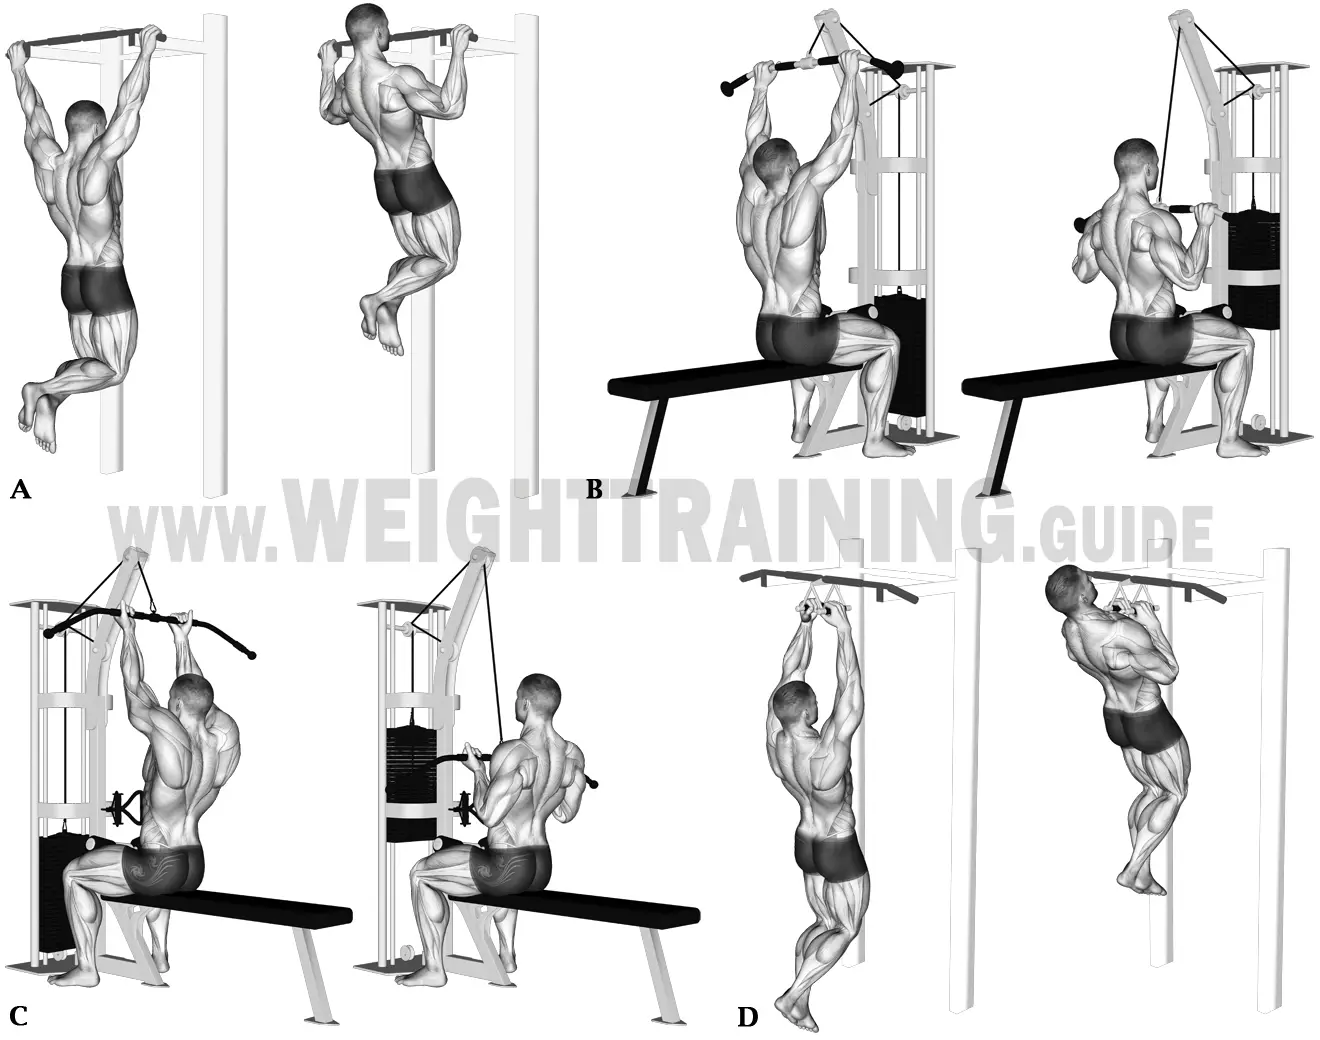 Vertical pulling exercises